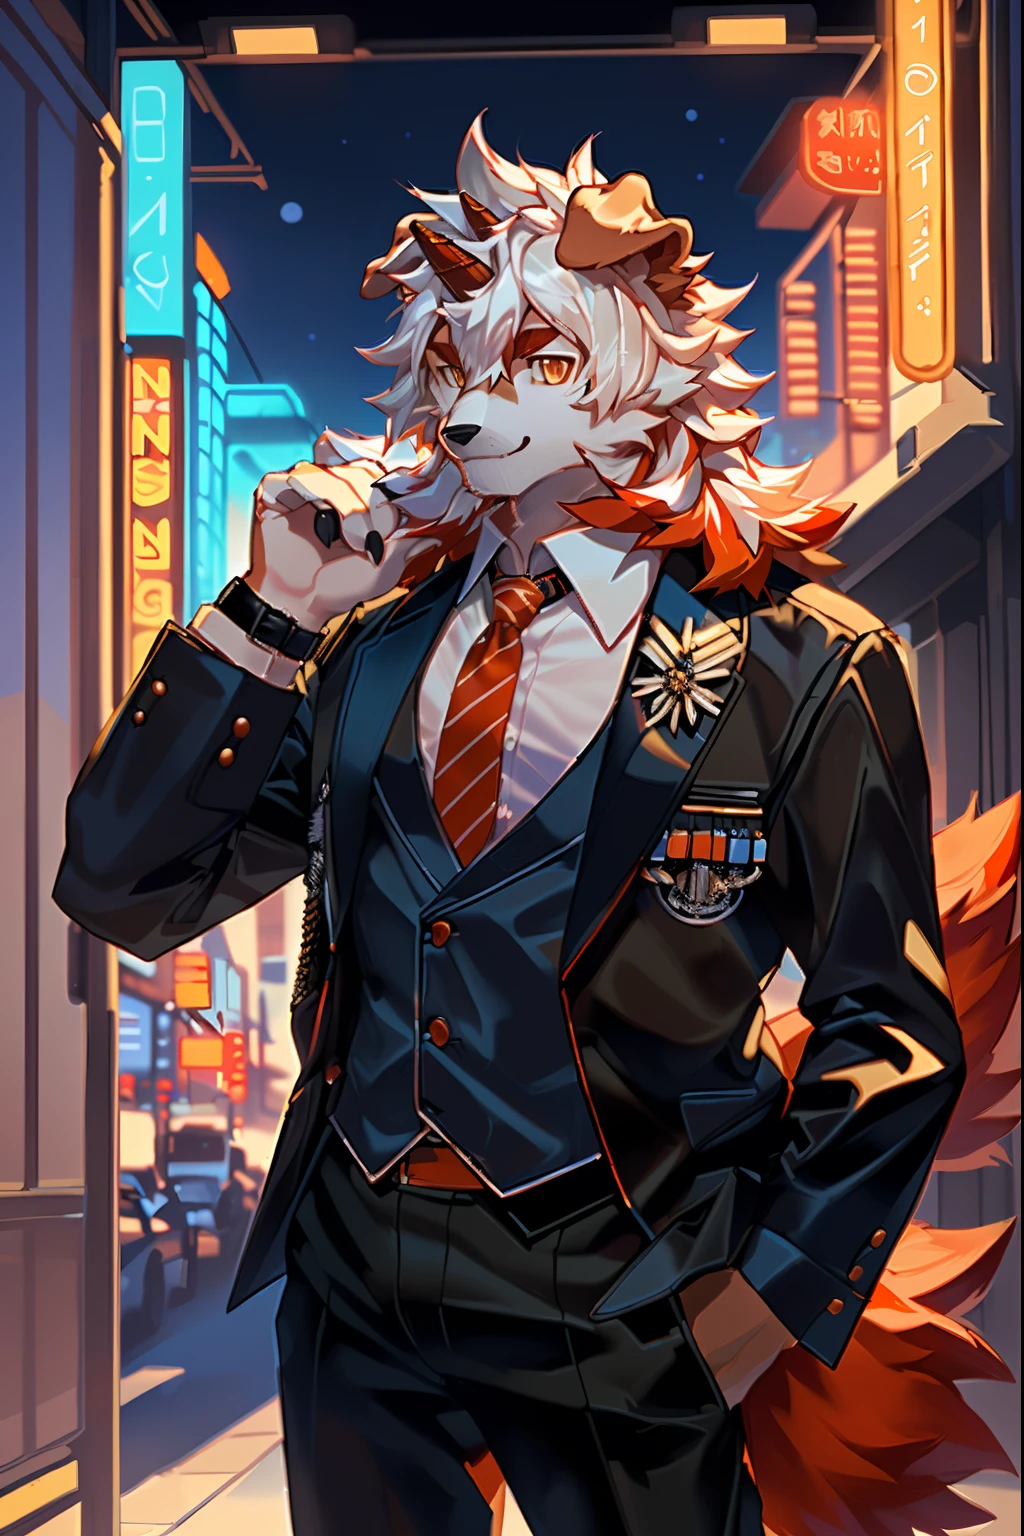 (by Hioshiru, by null-ghost, By personalami, by Honovy, by thebigslick, author：Feinhertz), Male, Solo, domestic dog, horn, floppy ears, clawed paws,  Smile, Neon lights，In the office building，Masterpiece, Best quality, offcial art, Extremely detailed Cg Unity 8K wallpaper, Ultra-detailed, Best Illustration, Best shadow, Perfect lighting, pegging (/arknight/), White fur, Furry male, Dog boy, Furry, Two-tone fur, 1boys, multicolored hair, Male focus, Horns, Striped hair, Dog ears, Animal ears, single horn, Brown fur, bangs, Orange hair, White hair, Medium hair, Orange eyes, Solo,Black pupils，In black suit，Black trousers，White color blouse，Plaid tie，full bodyesbian，leather shoes，A collar is worn around his neck，Wrist watch，briefcase，Coffee in hand，Orange tail，Fluffy tail，full bodyesbian，Tall and strong